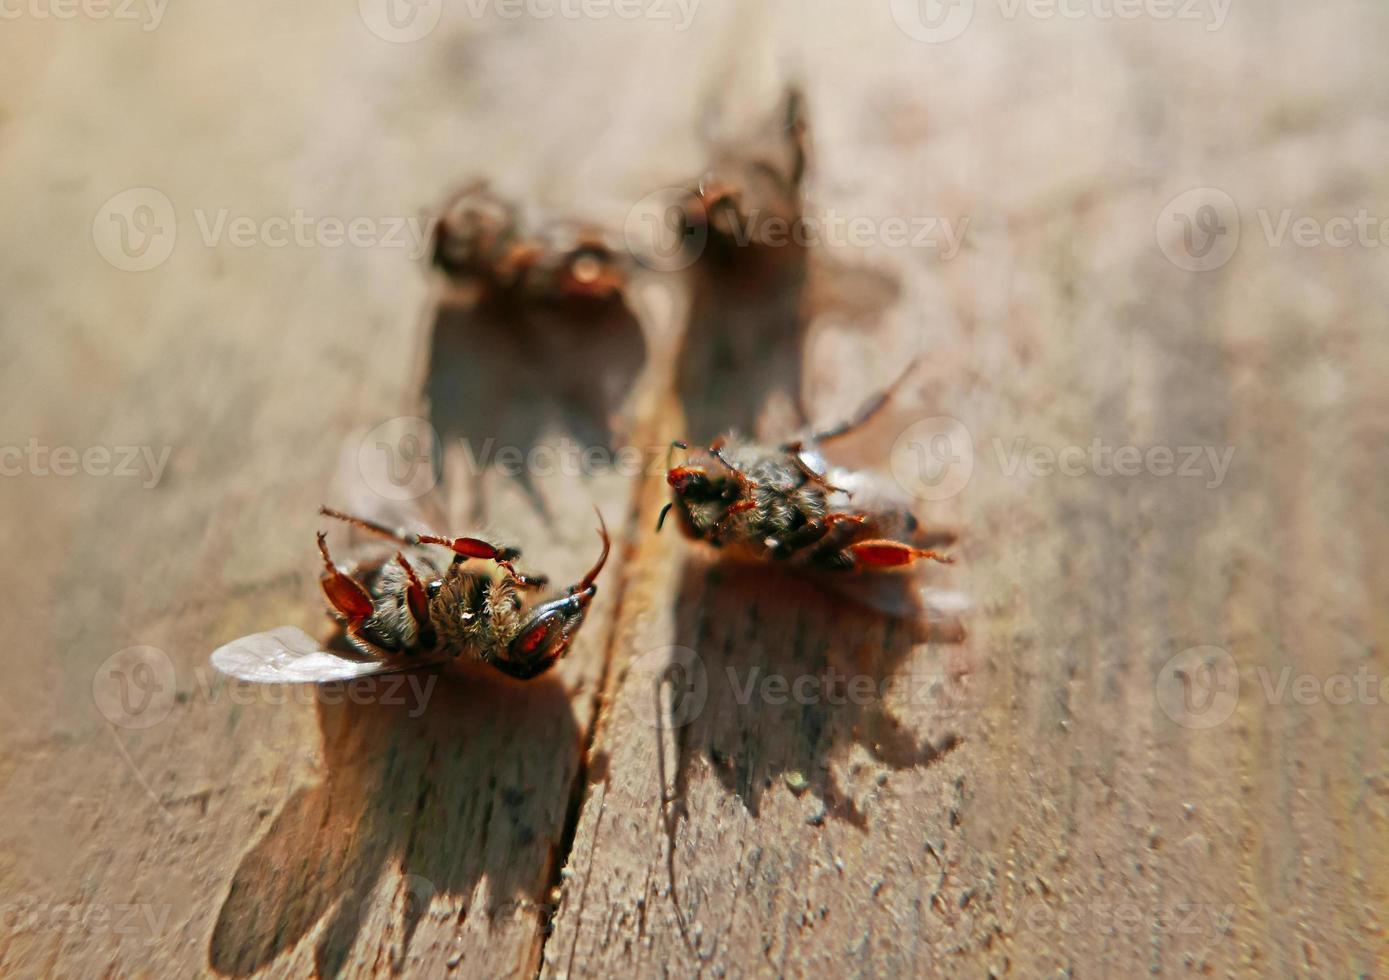 Dead bees on wood photo